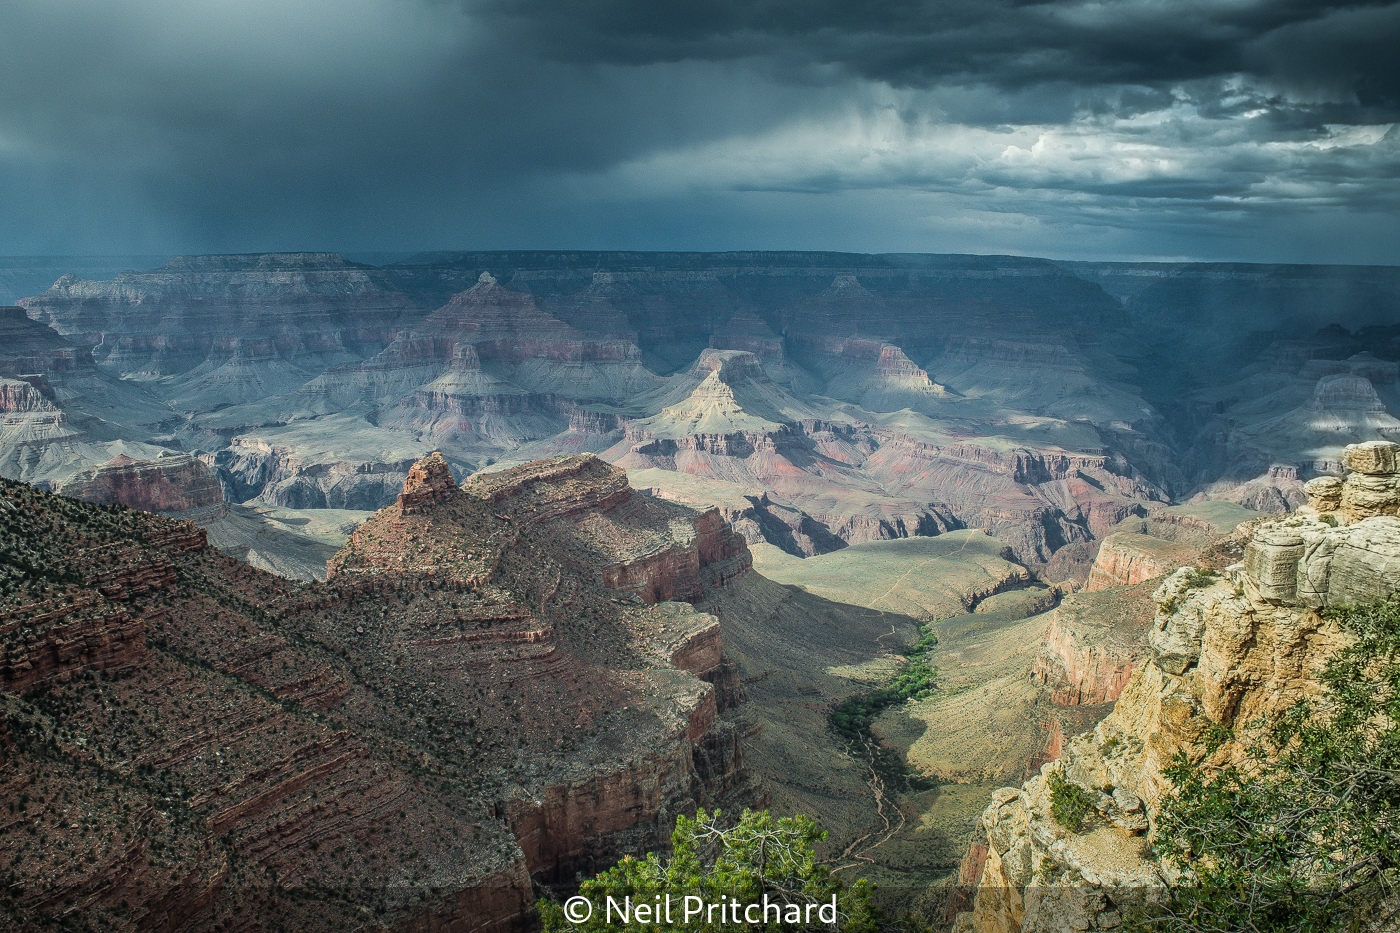 Neil Pritchard_Grand Canyon - Incoming Storm